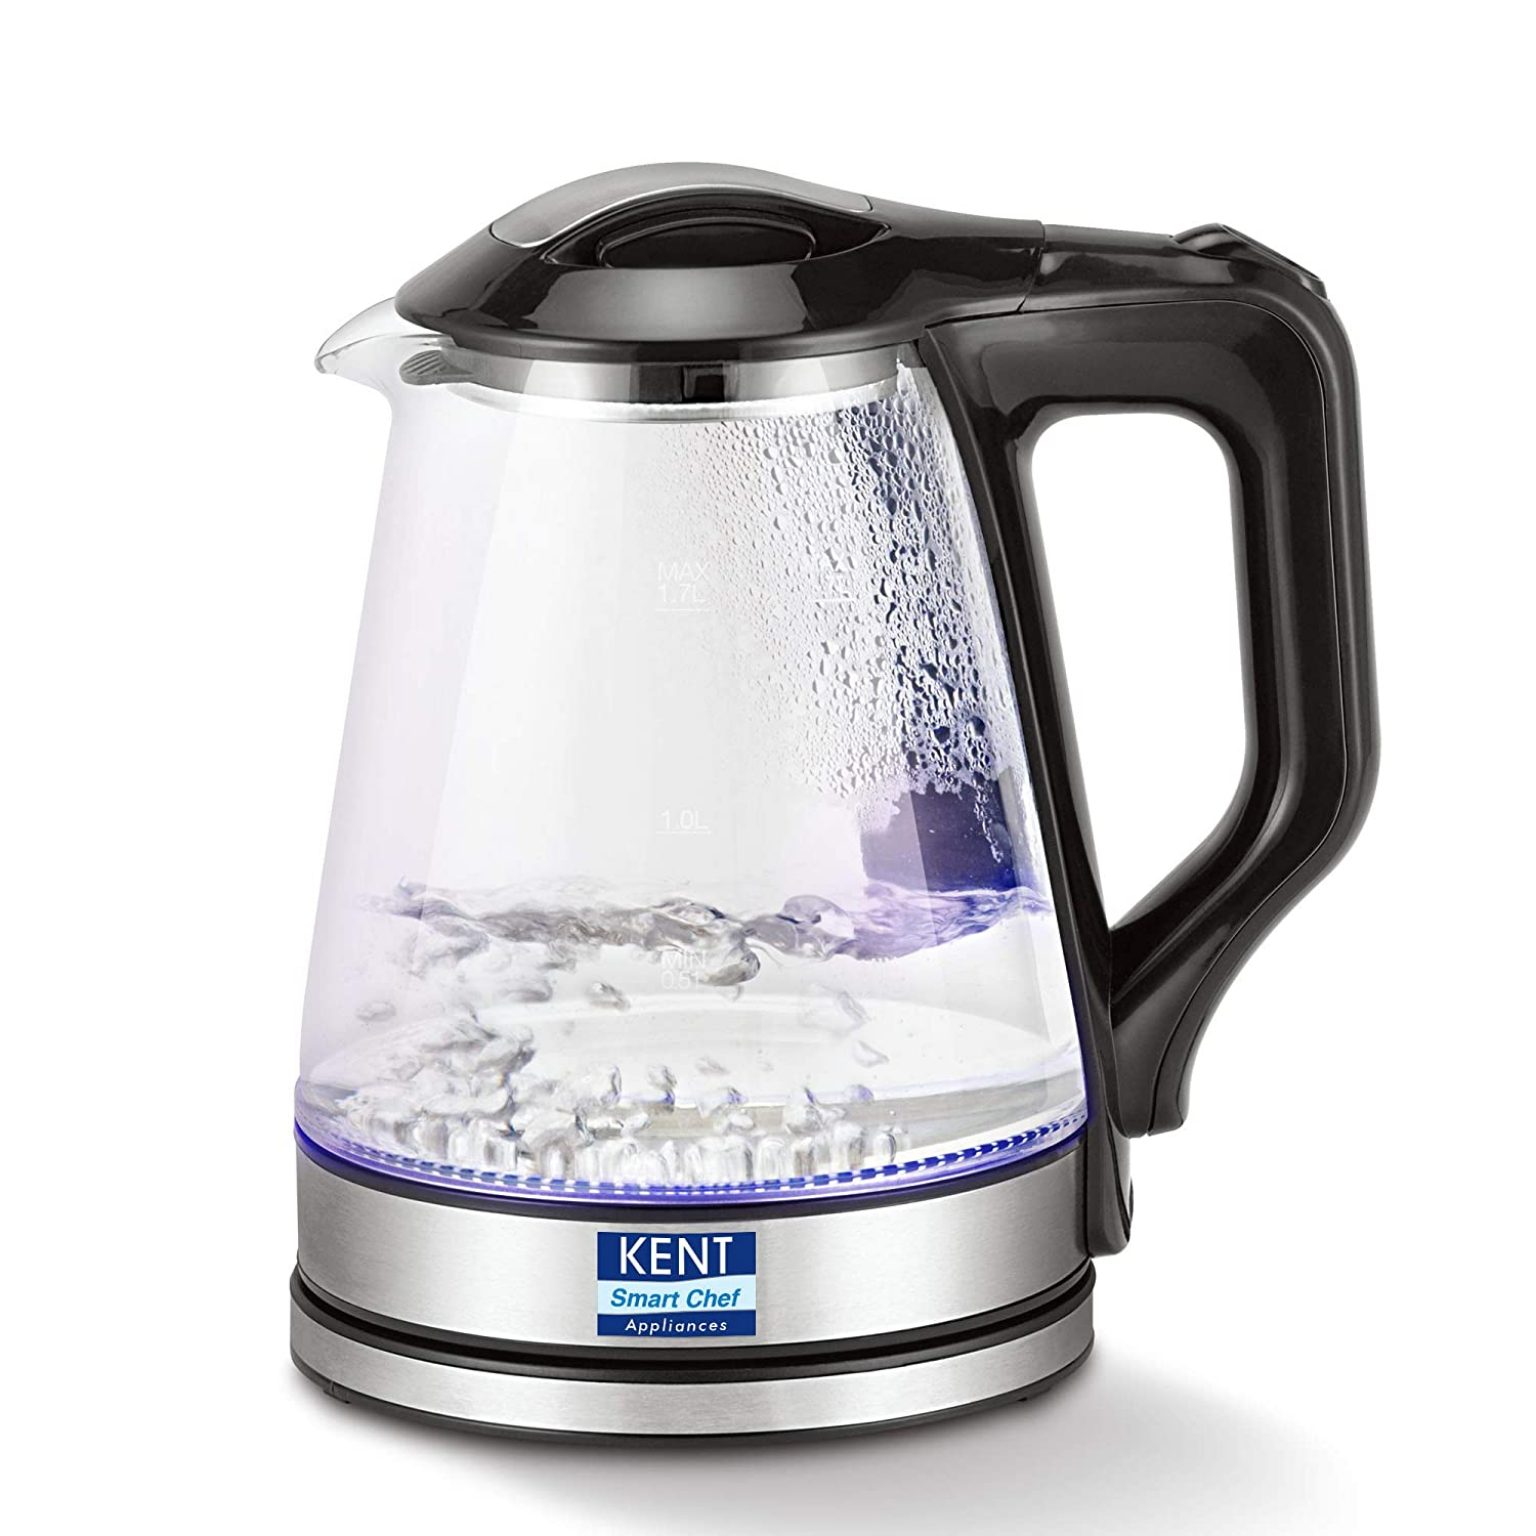 Top 5 Best Electric Kettle for your home and Kitchen 2022